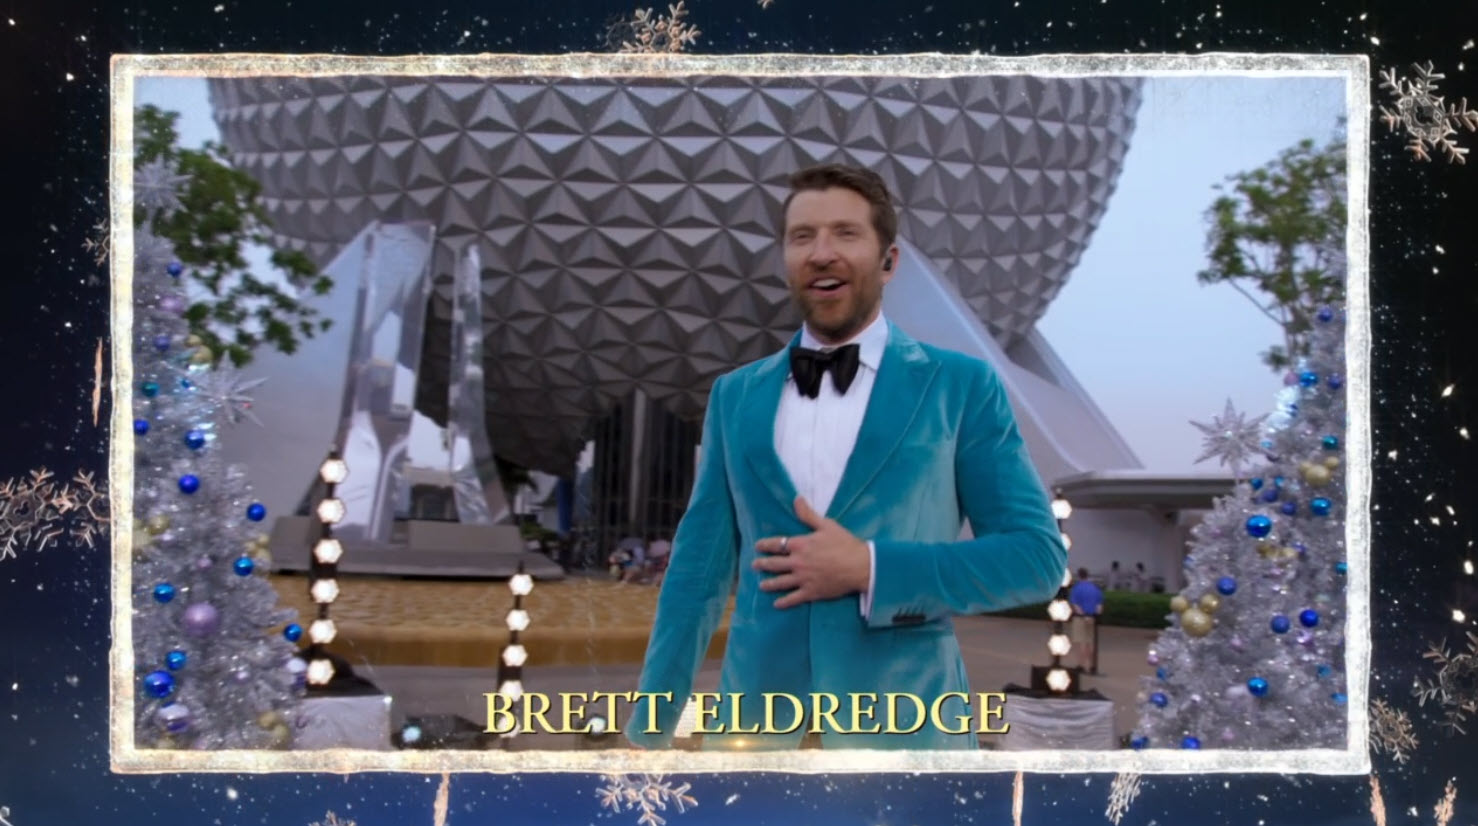 2021 Disney Parks Magical Christmas Day Parade Chance the Rapper – “Who’s to Say” Brett Eldredge – “Rudolph the Red-Nosed Reindeer”